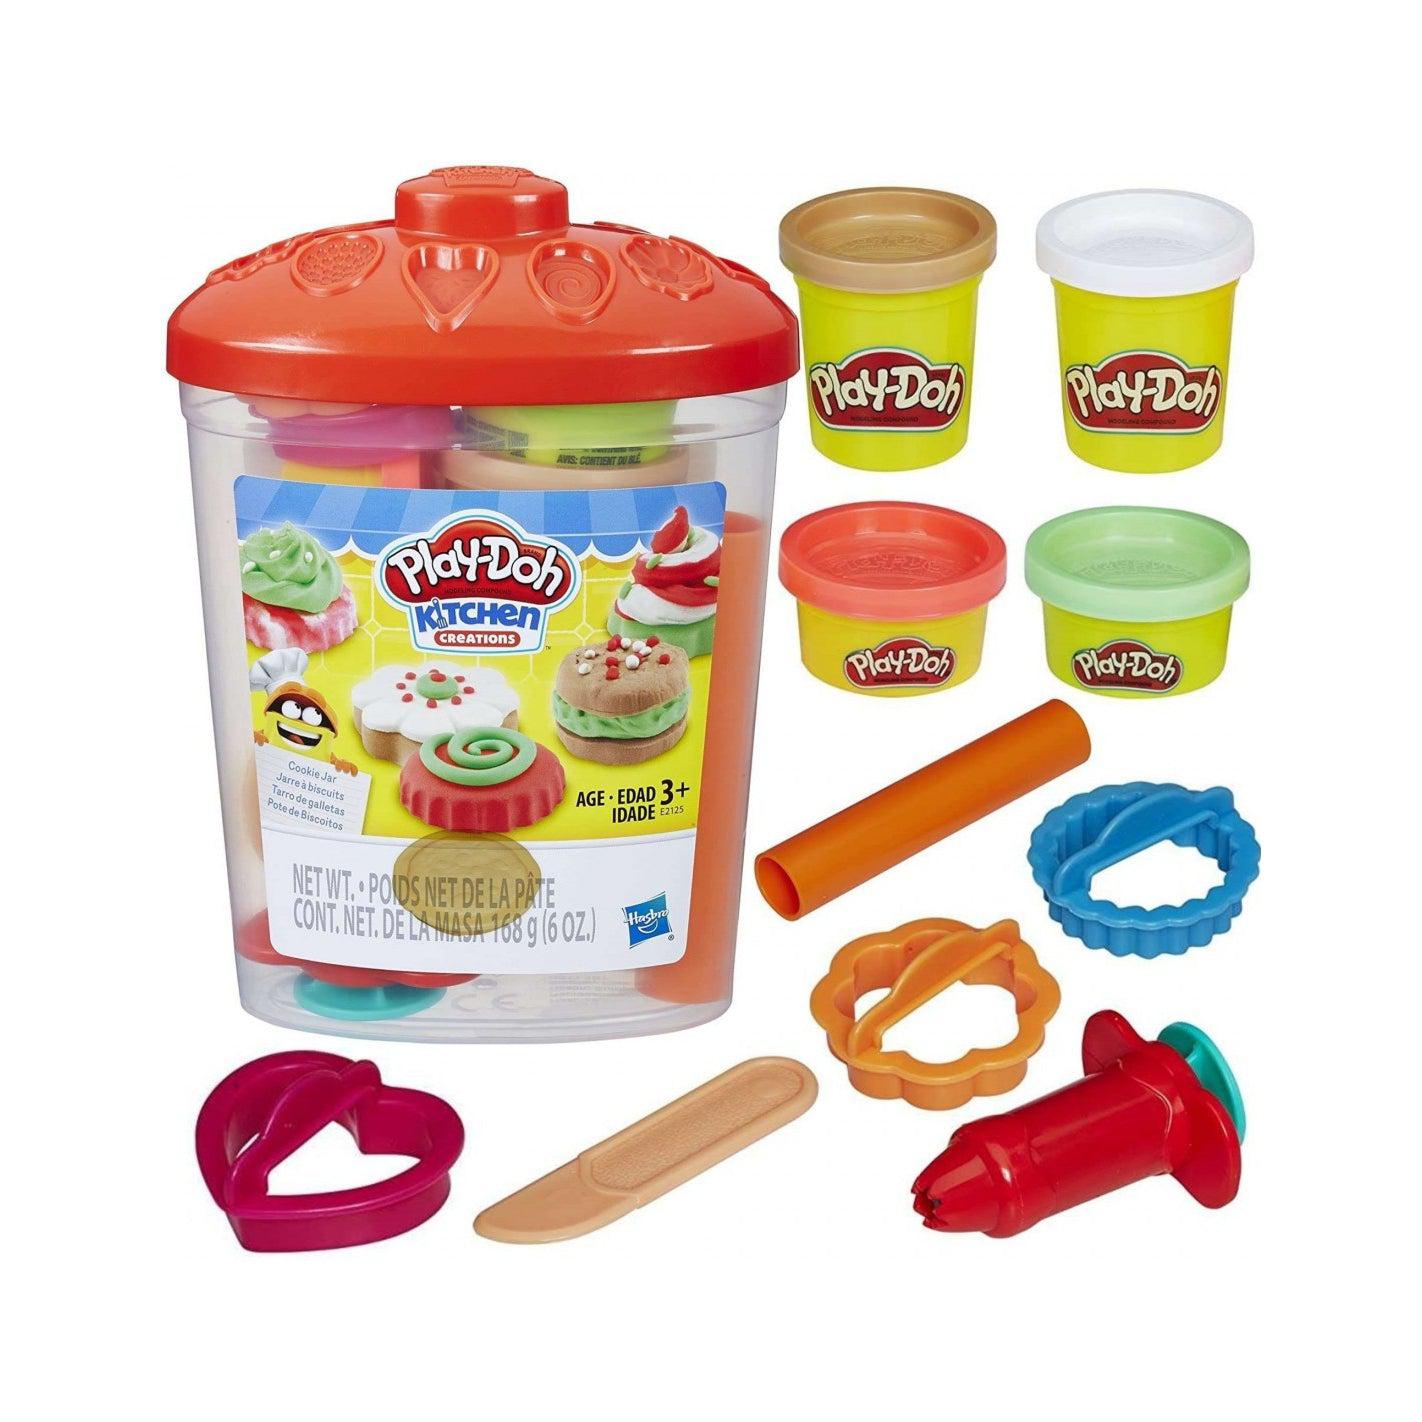 Hasbro-Play-Doh Kitchen Creations Cookie Jar-E2125-Legacy Toys